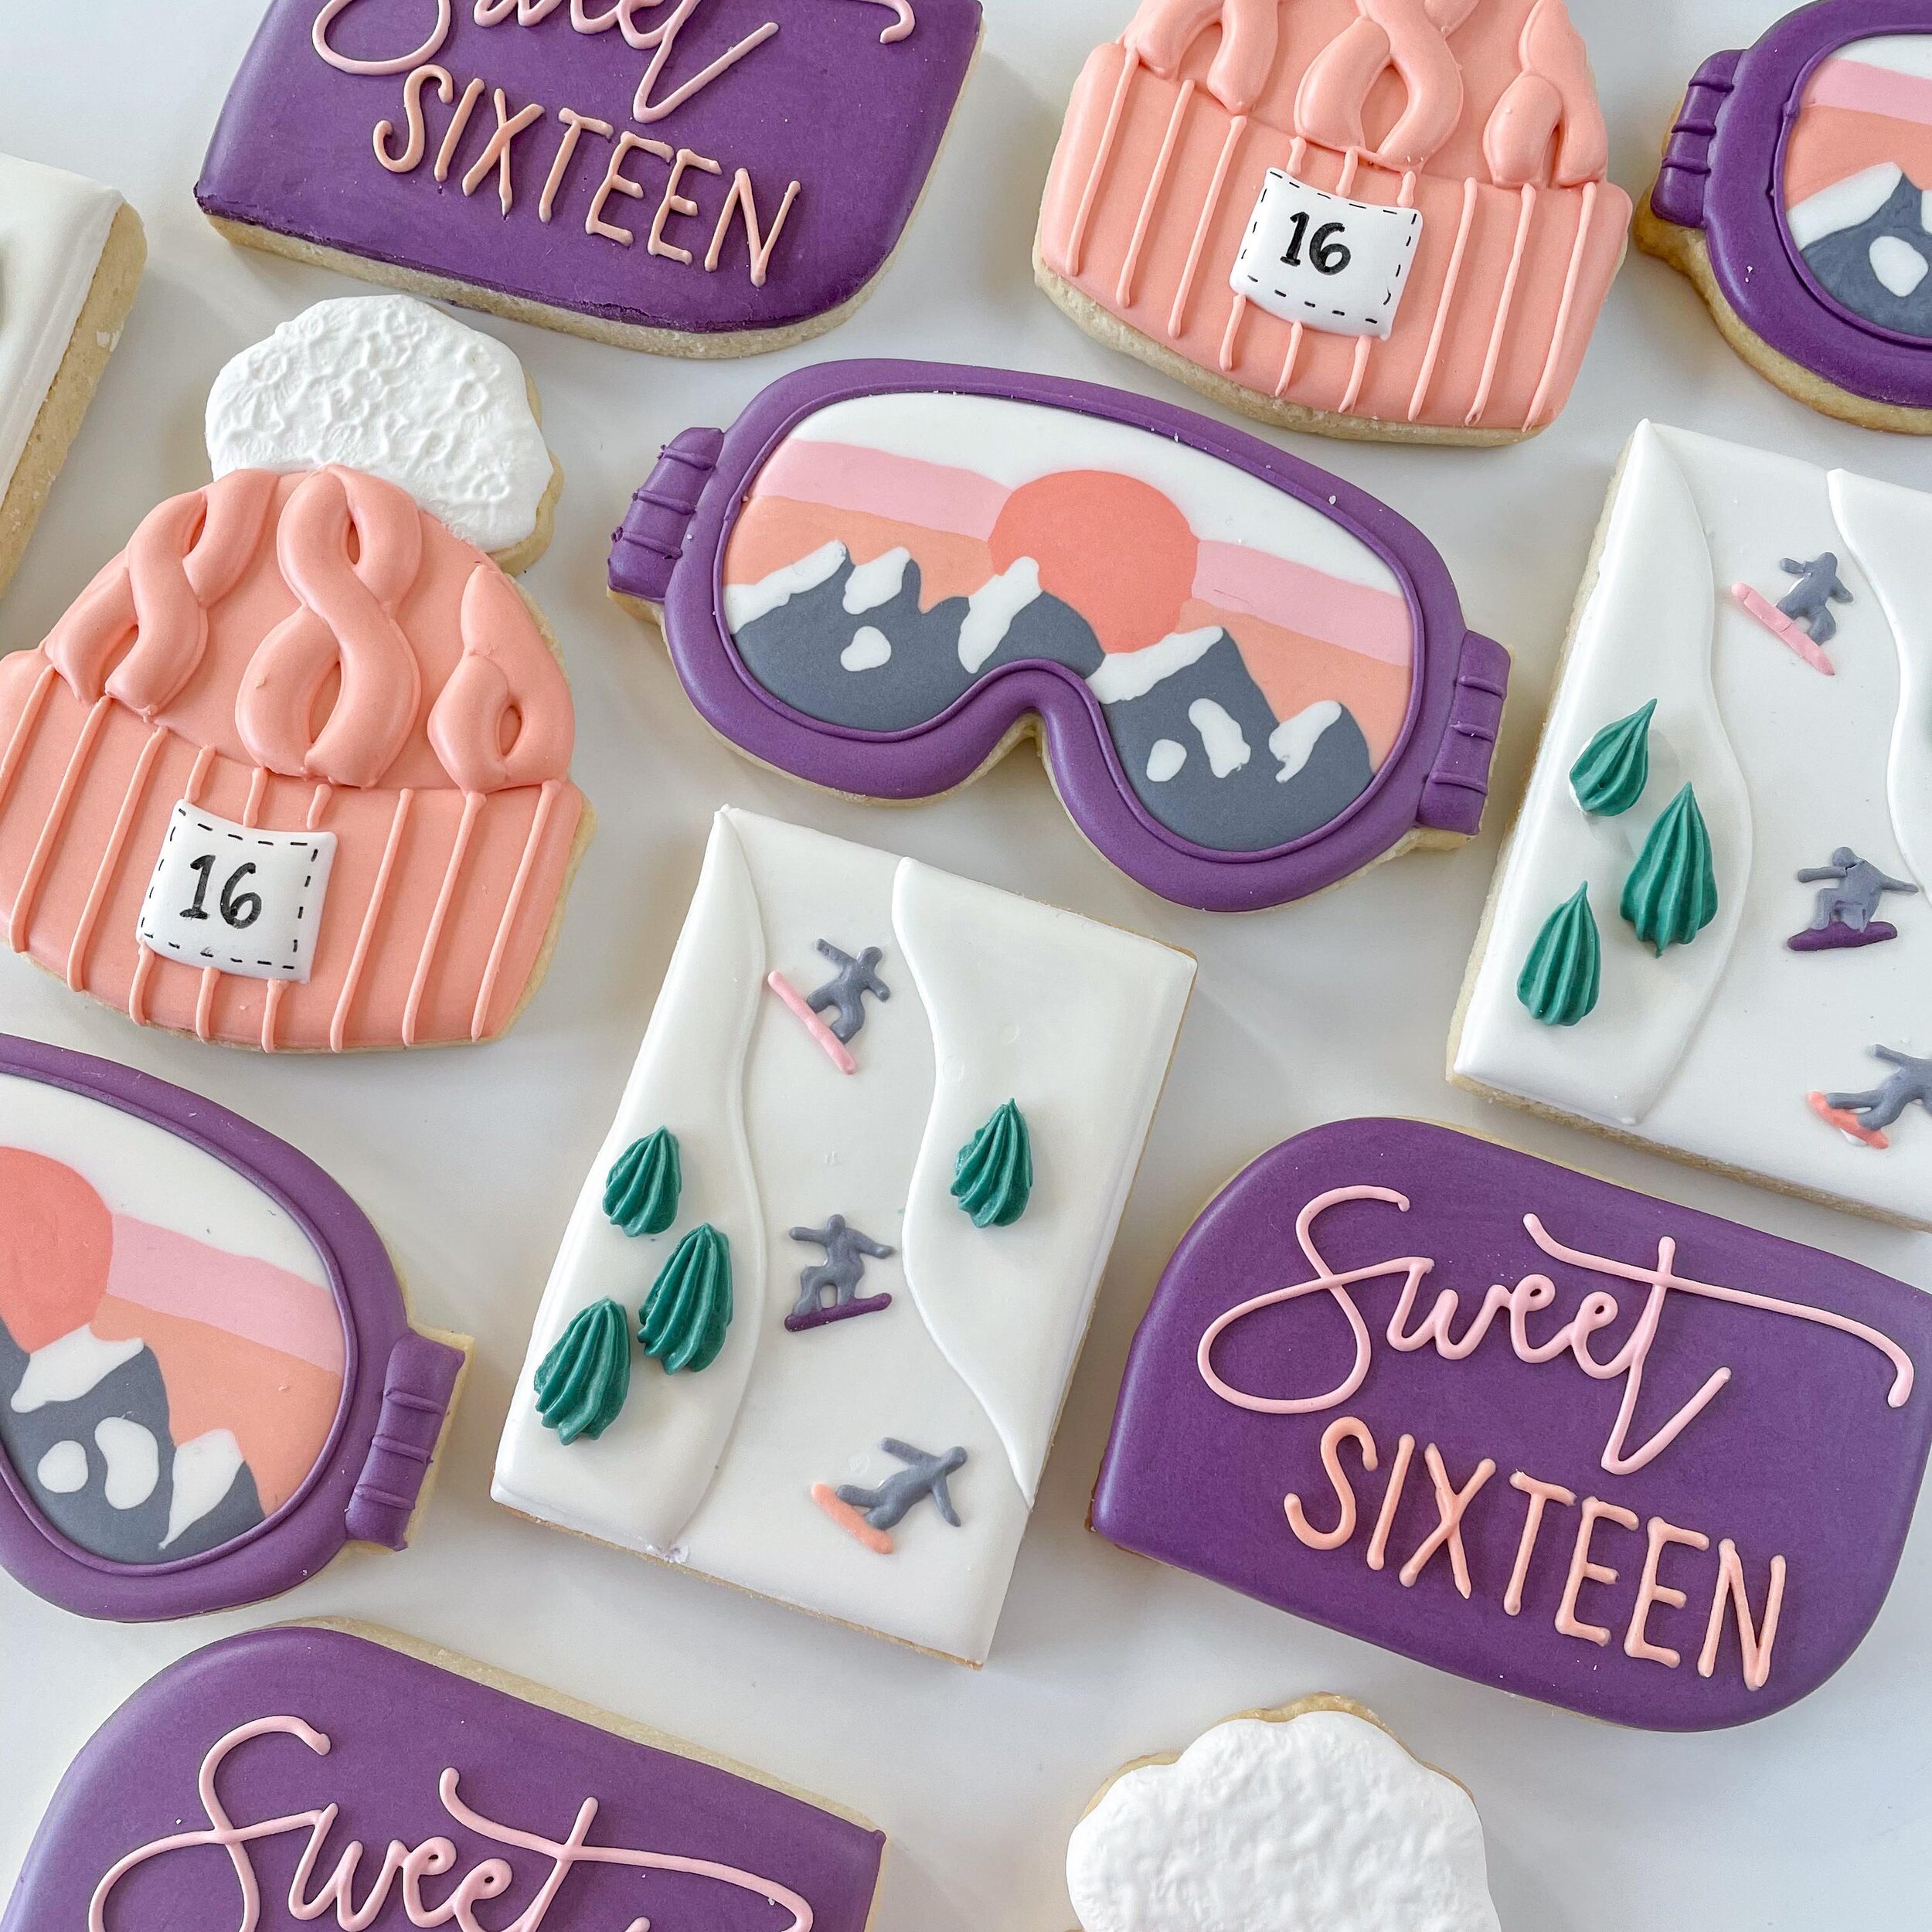 Not the most Spring Break-y of sets but wanted to post these before winter is a distant memory! ☀️

#snowboardcookies #skicookies #decoratedcookies